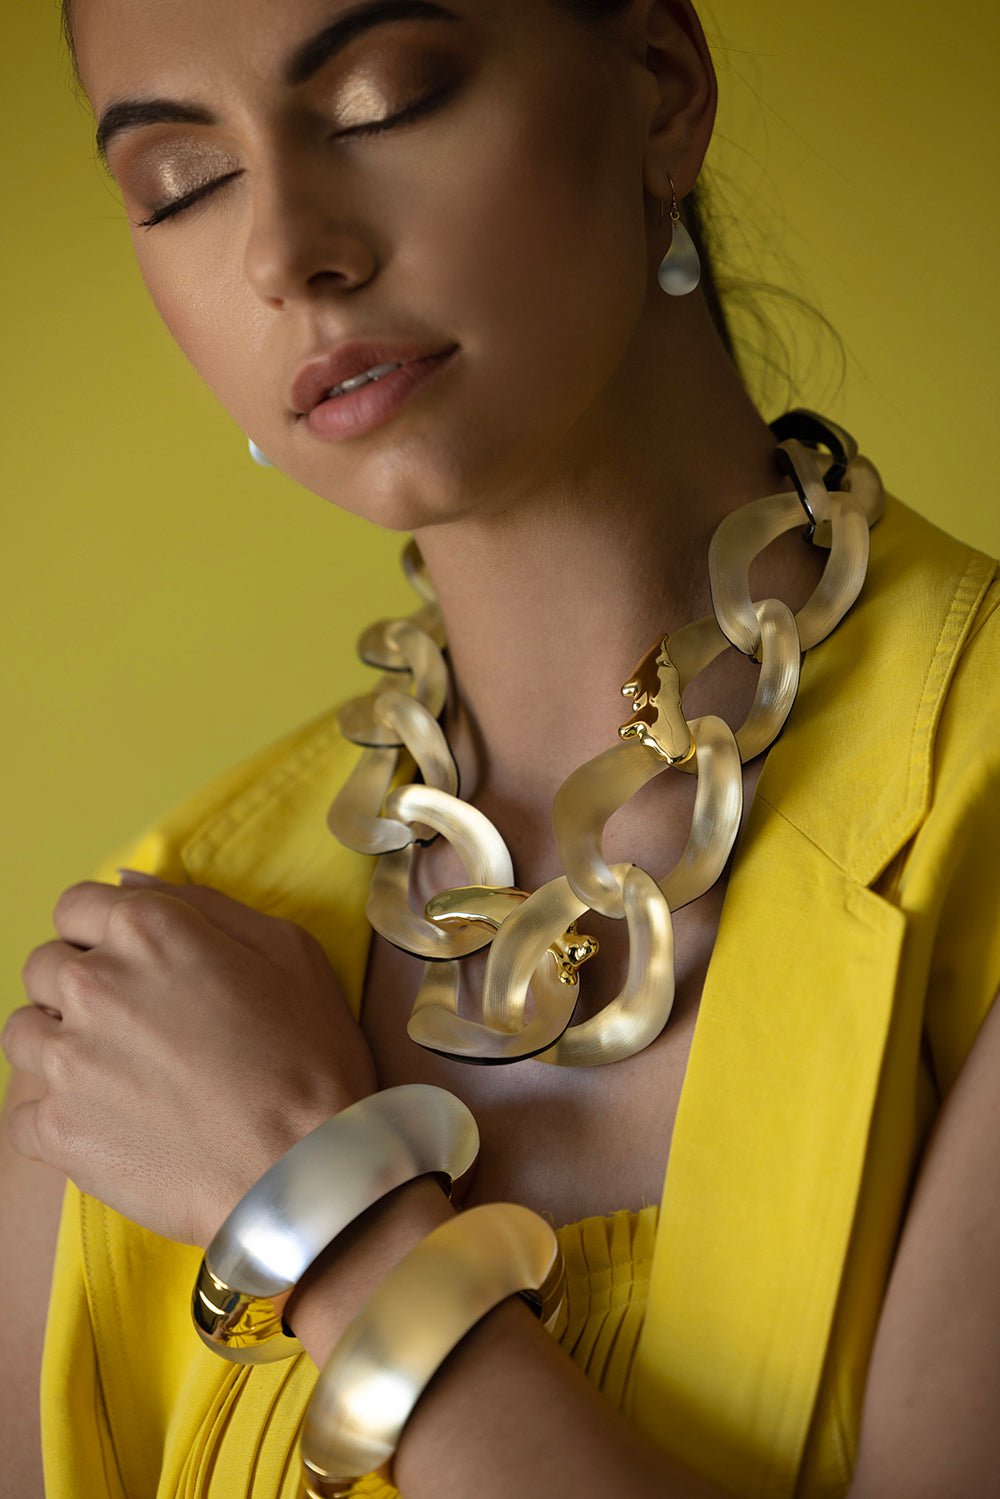 ALEXIS BITTAR-Extra Large Molten Link Necklace - Gold-GOLD